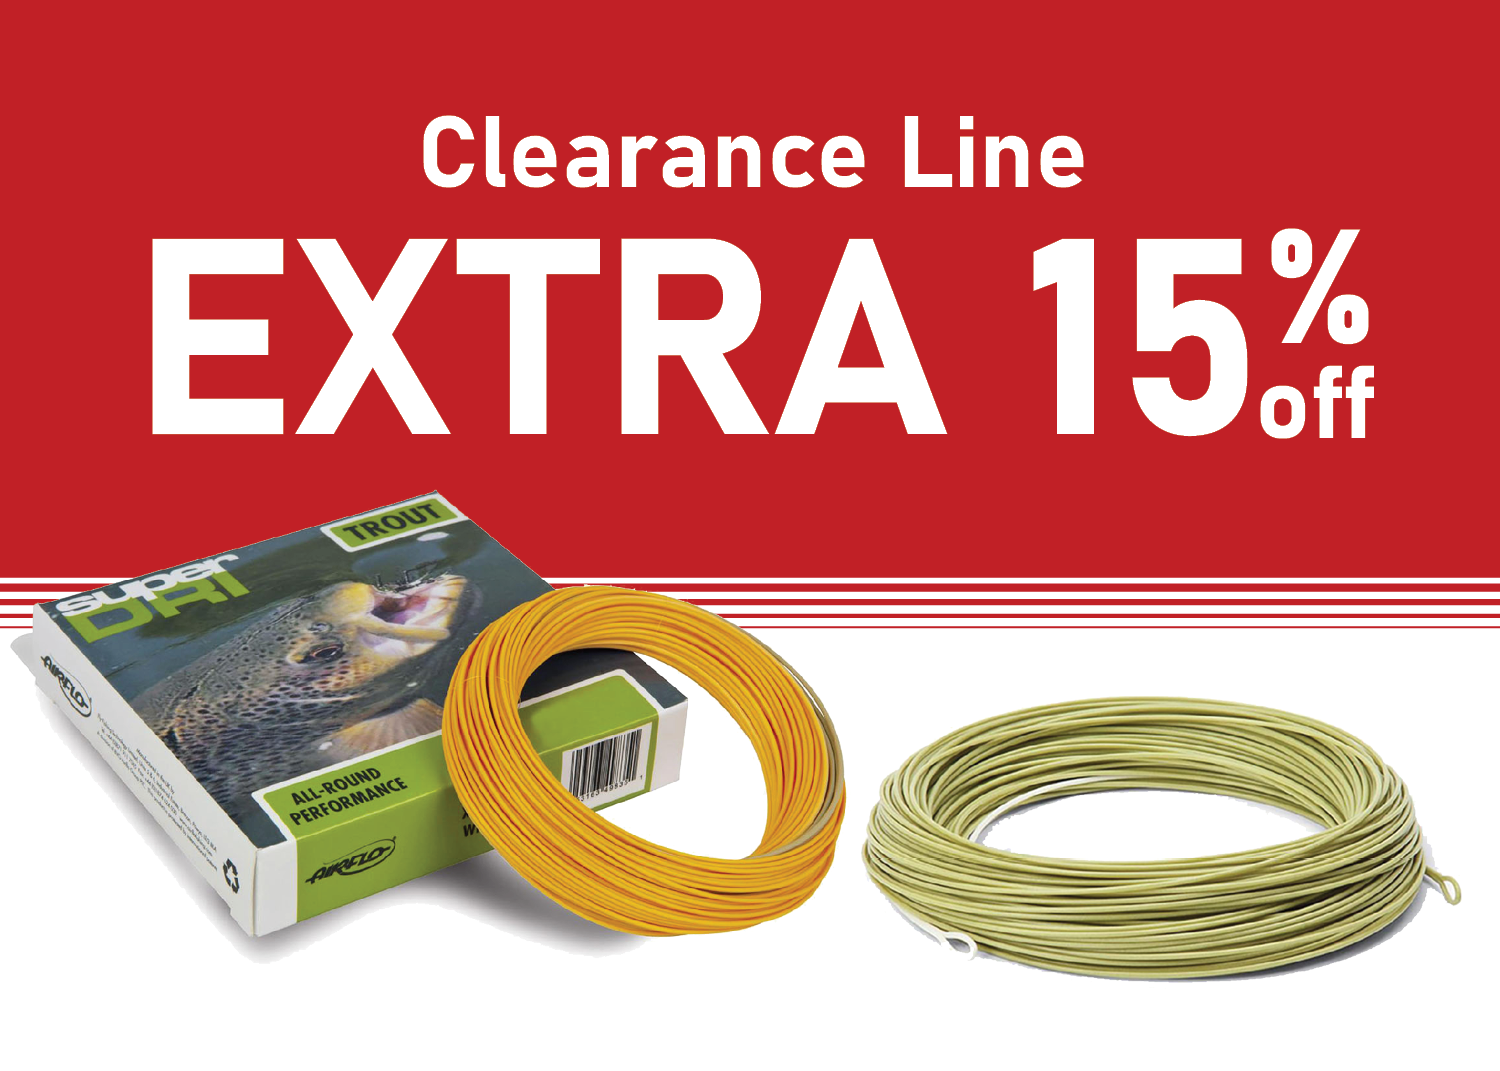 Save an EXTRA 15% on Clearance Line